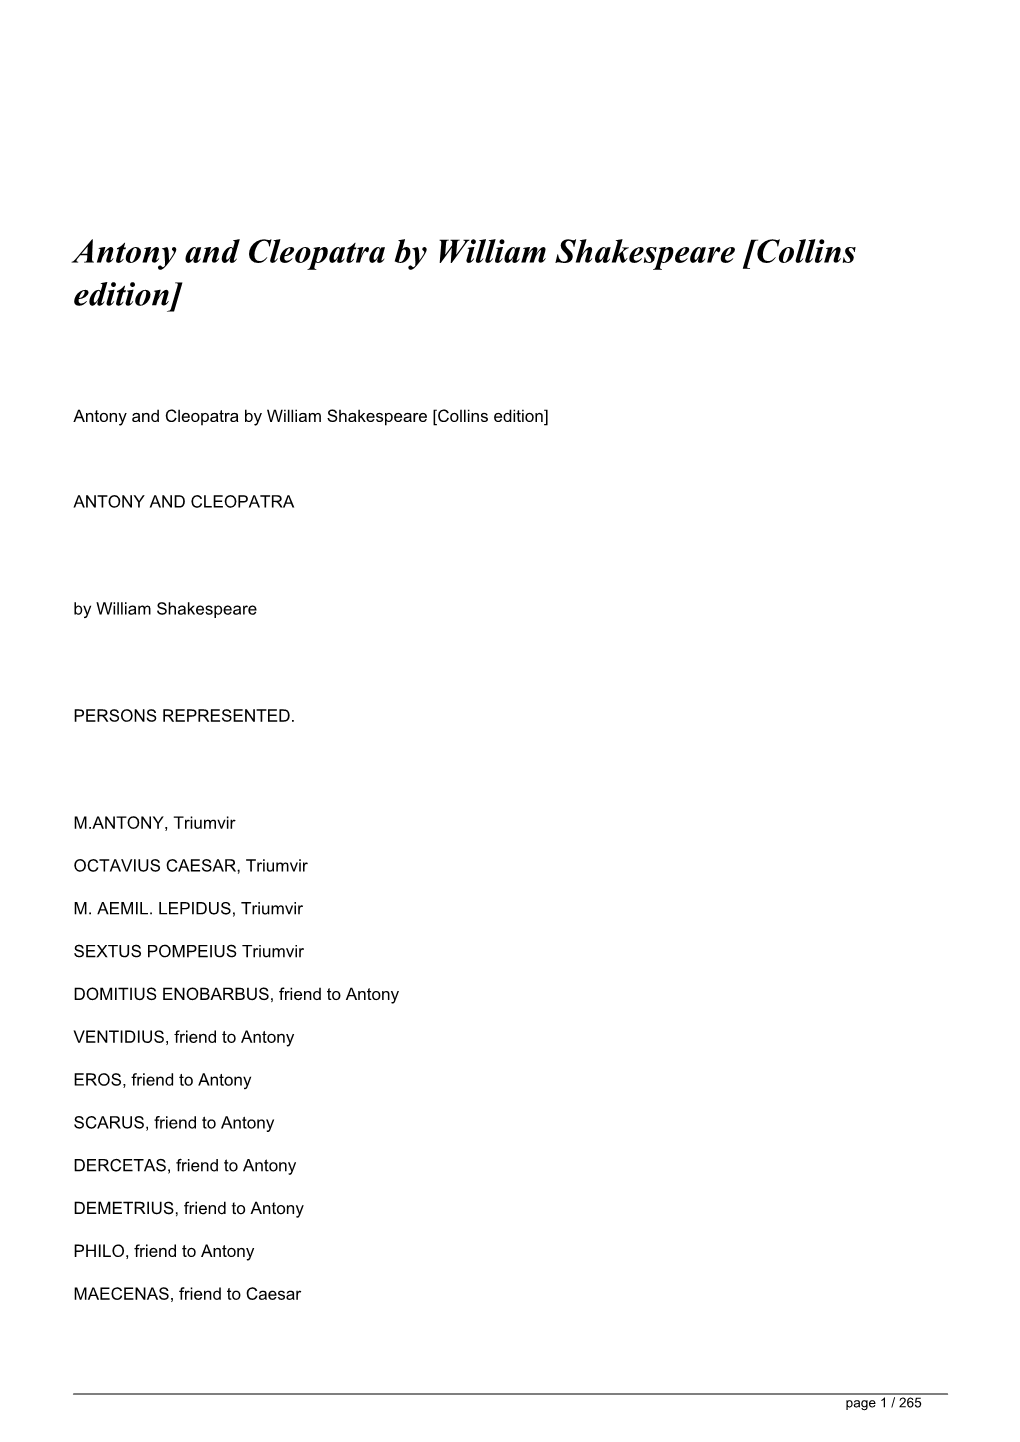 Antony and Cleopatra by William Shakespeare [Collins Edition]